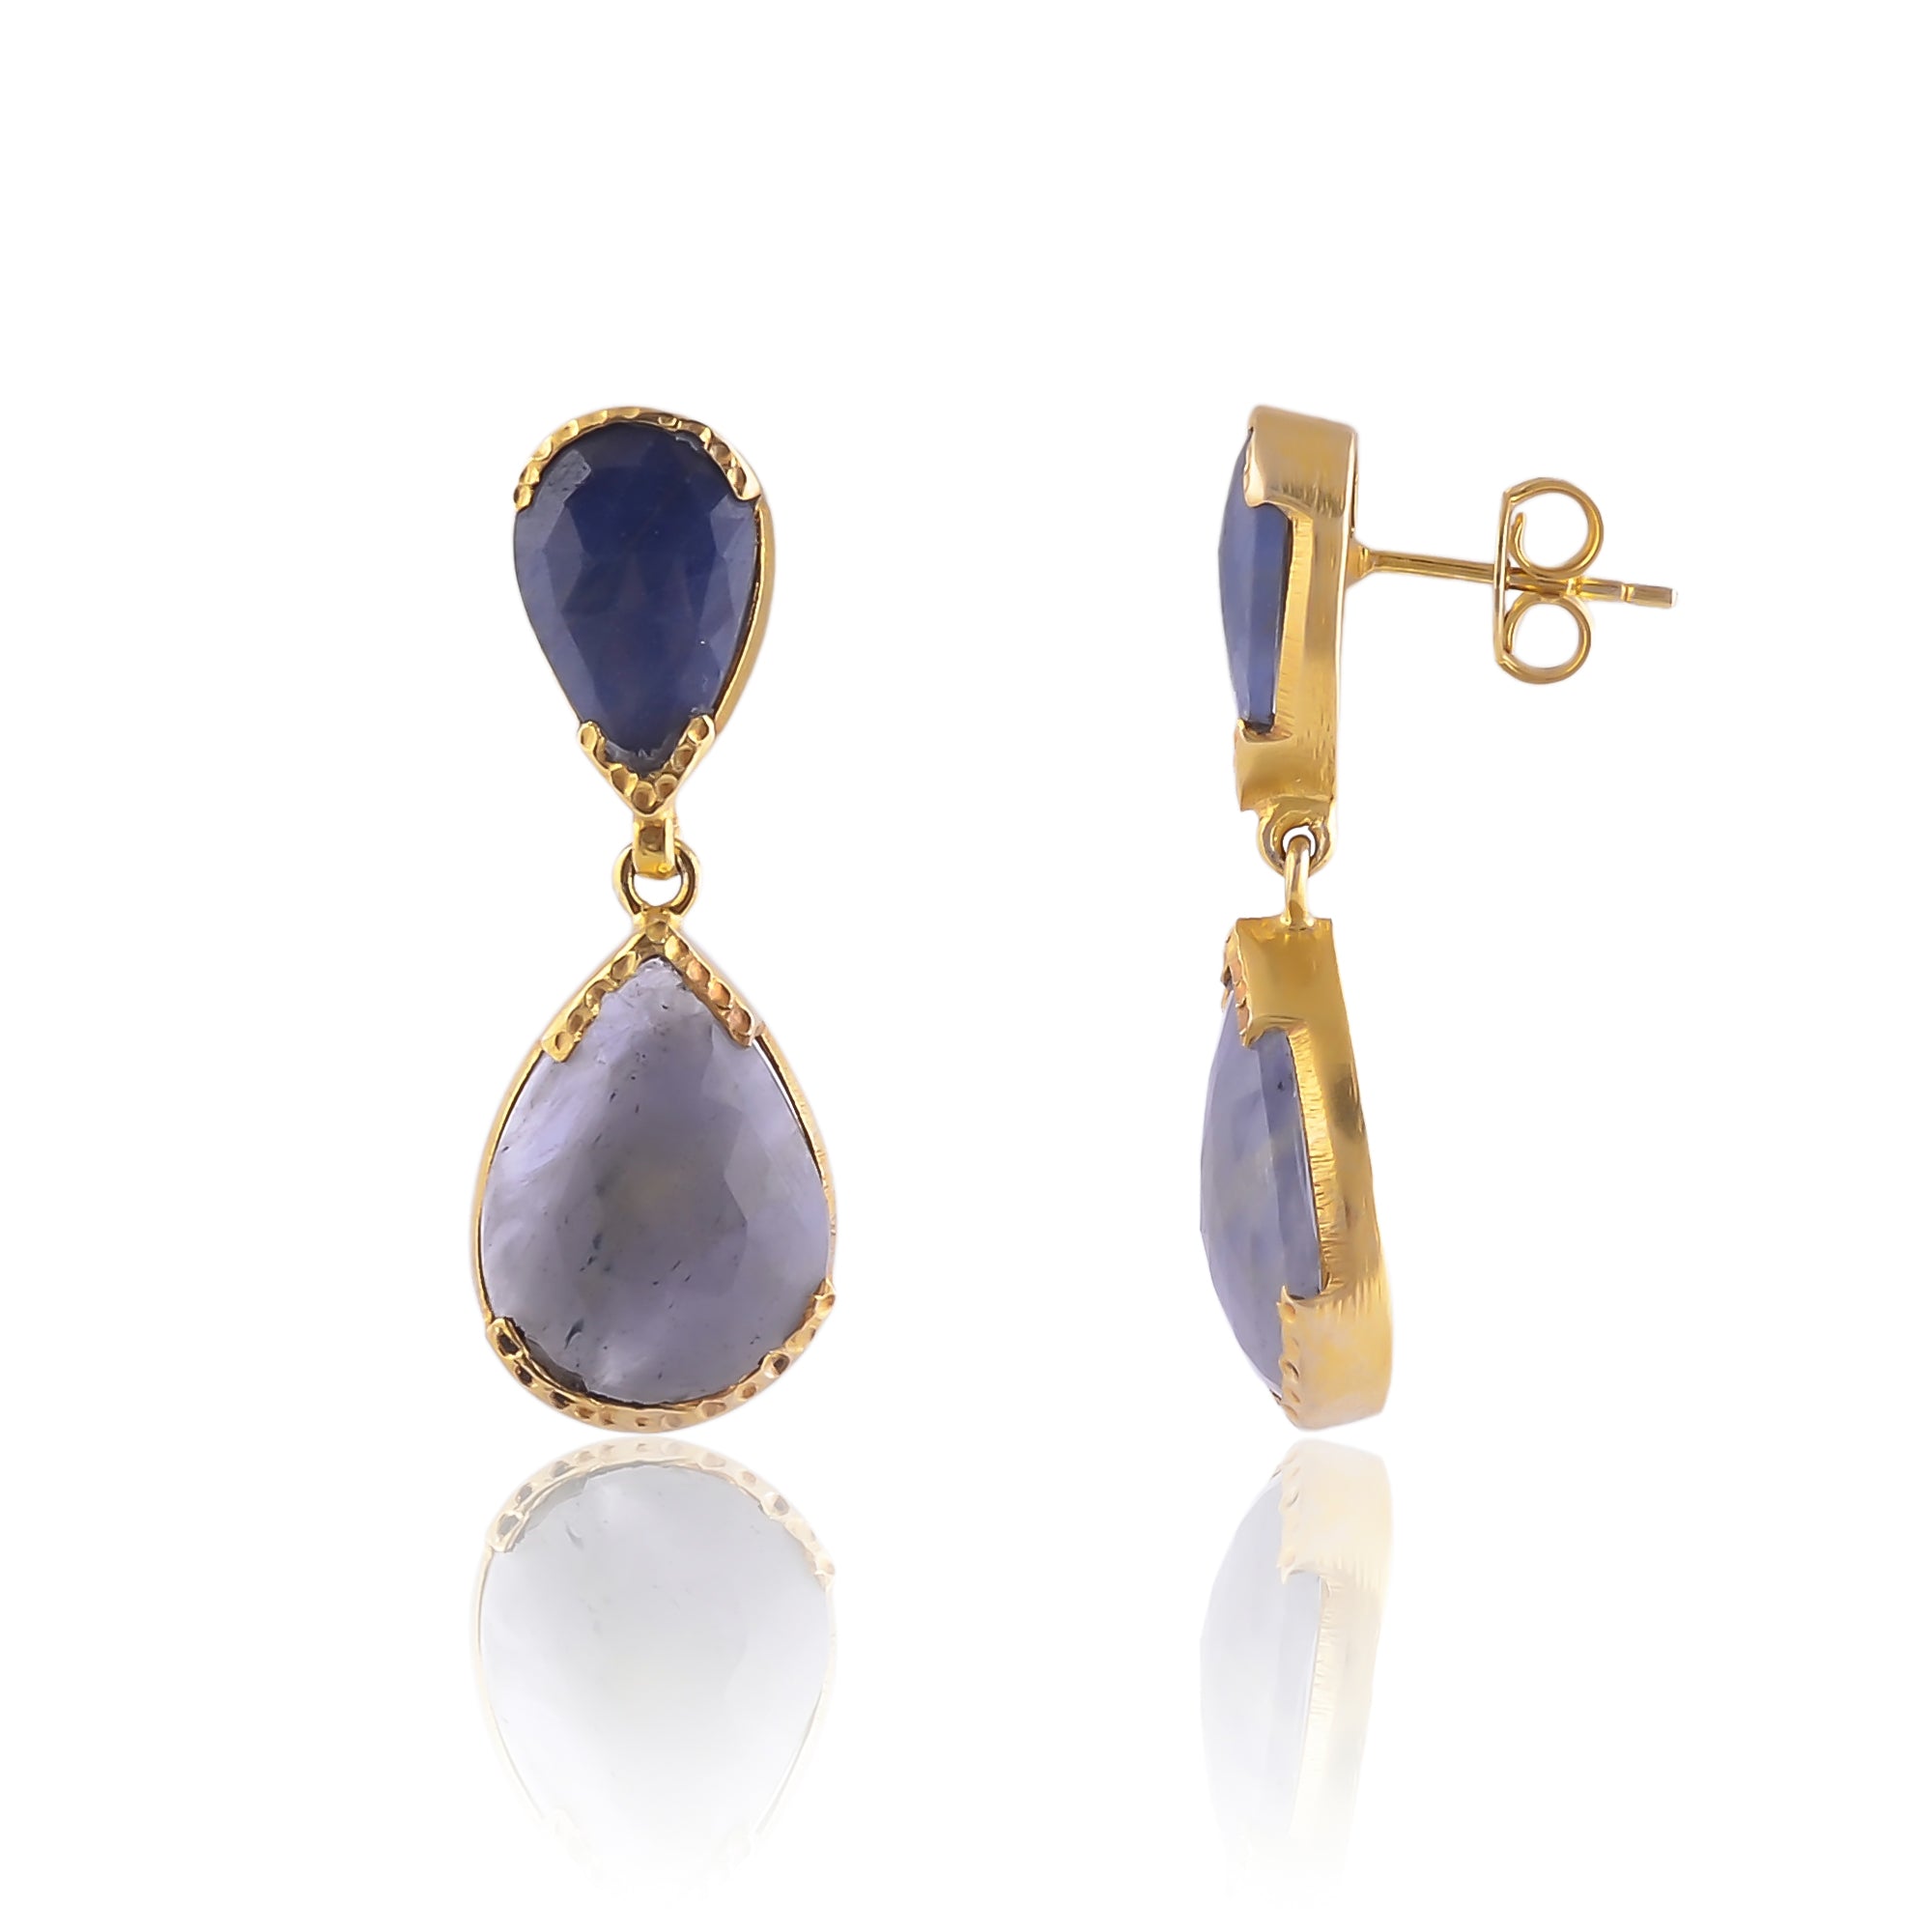 Buy Handmade Silver Gold Plated Sapphire Earring